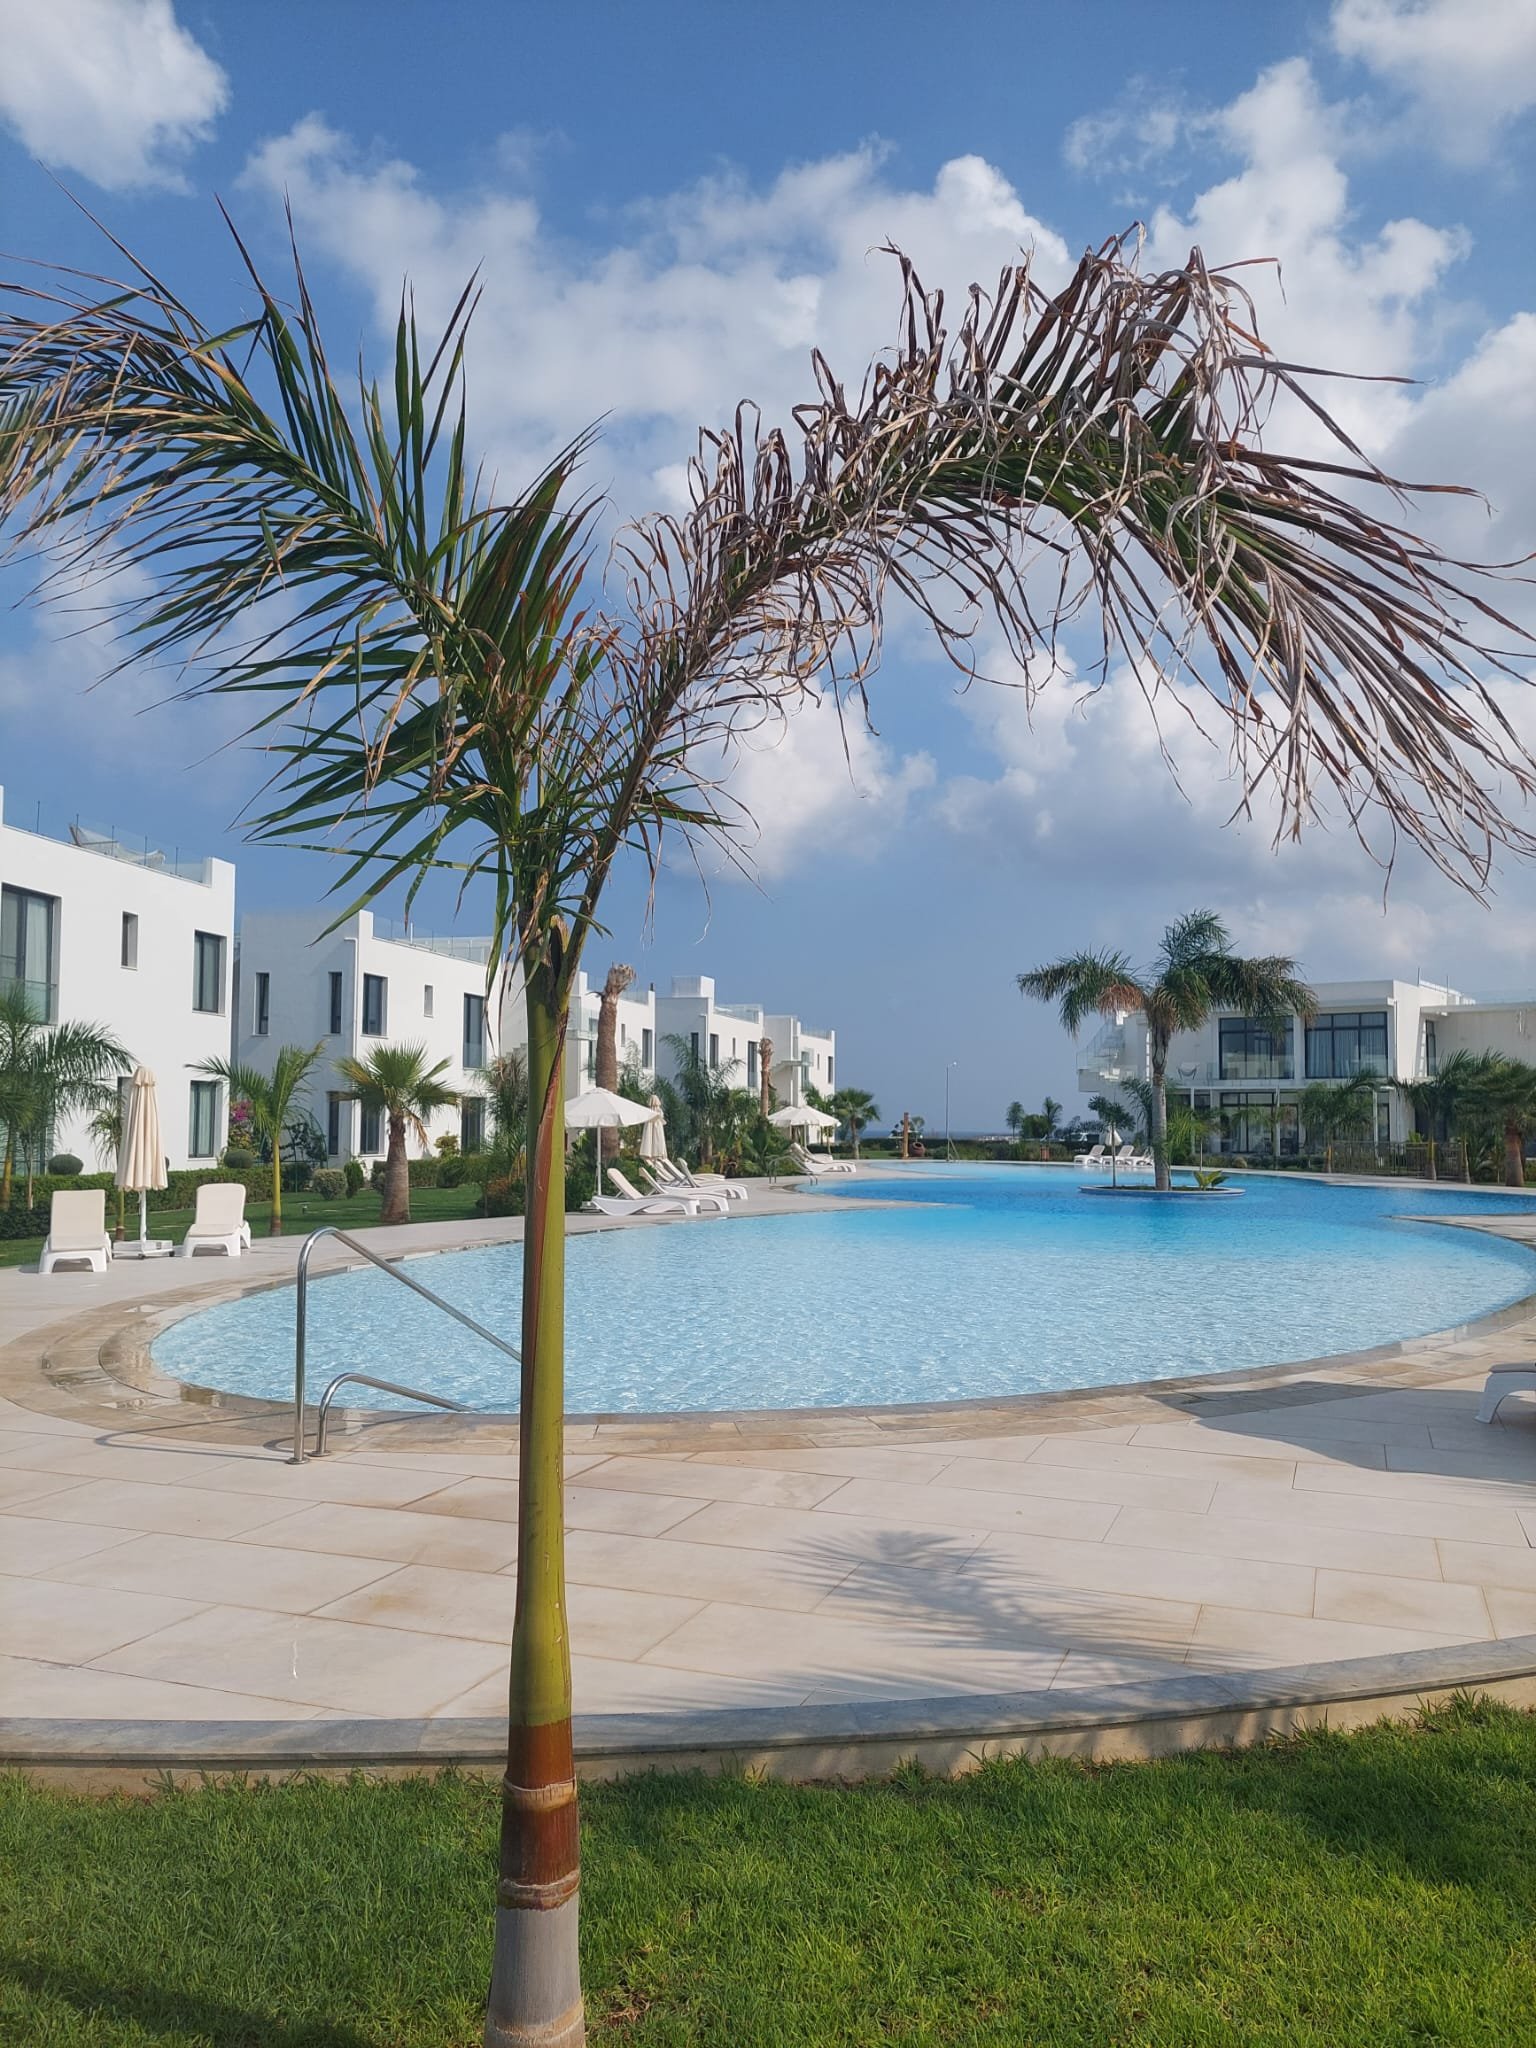 Don't Miss the Holiday Home Opportunity in Esentepede-ebd242bb-155c-46a9-bde5-8c4ee234a4aa